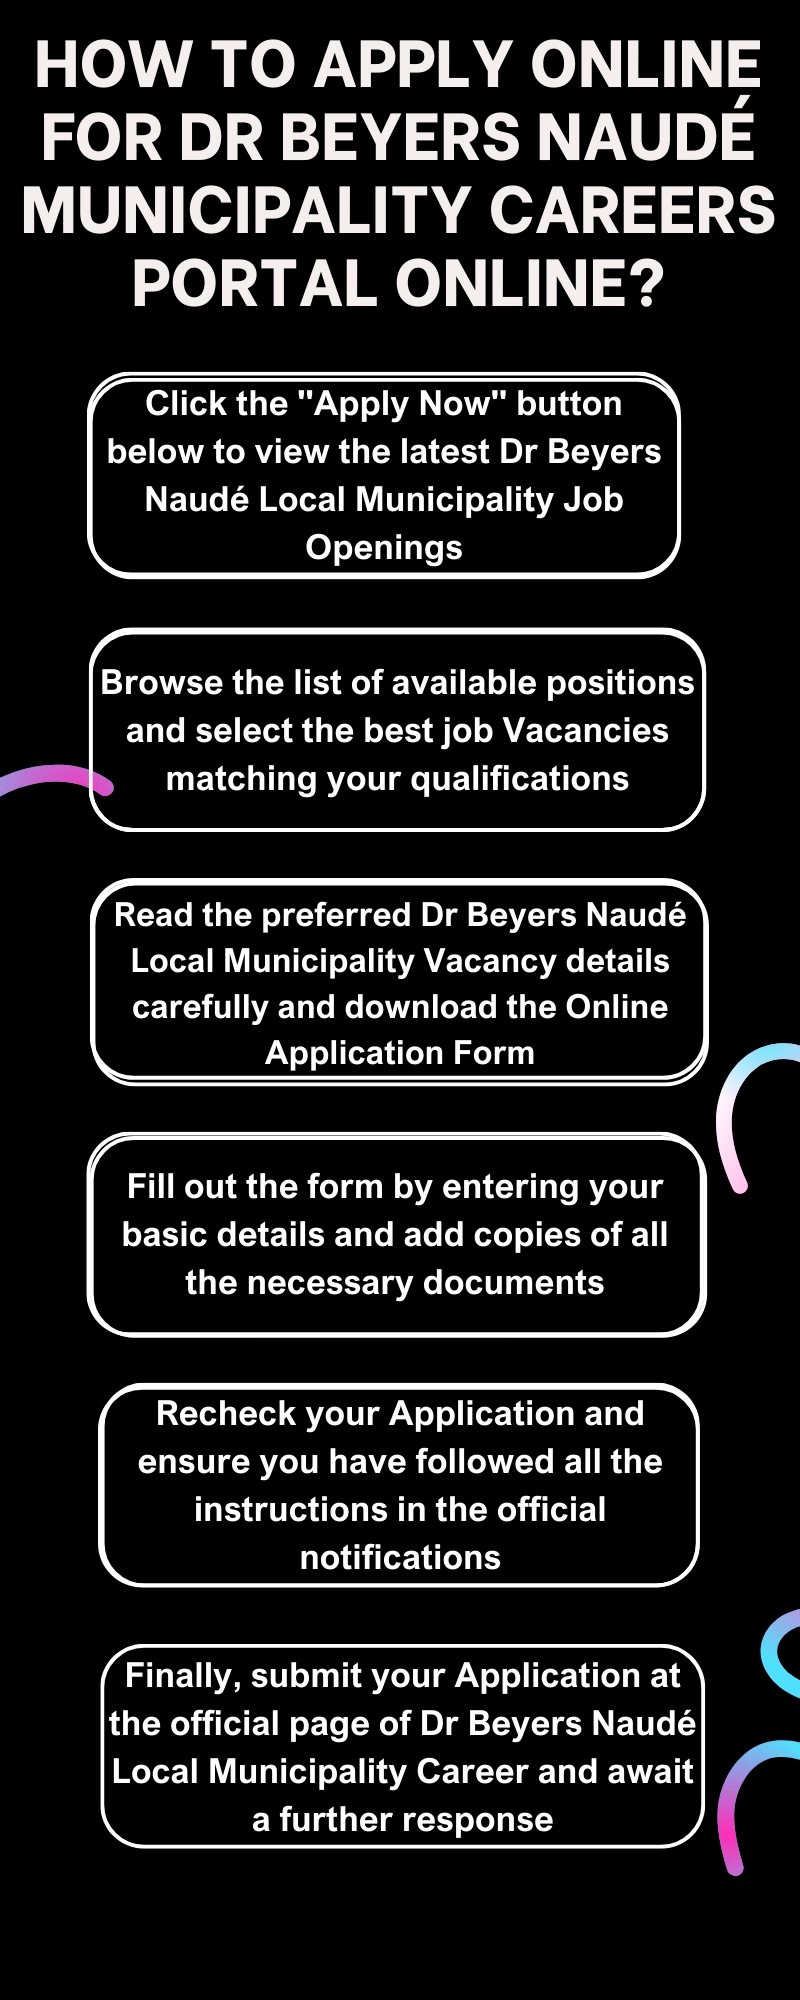 How to Apply online for Dr Beyers Naudé Municipality Careers Portal Online_